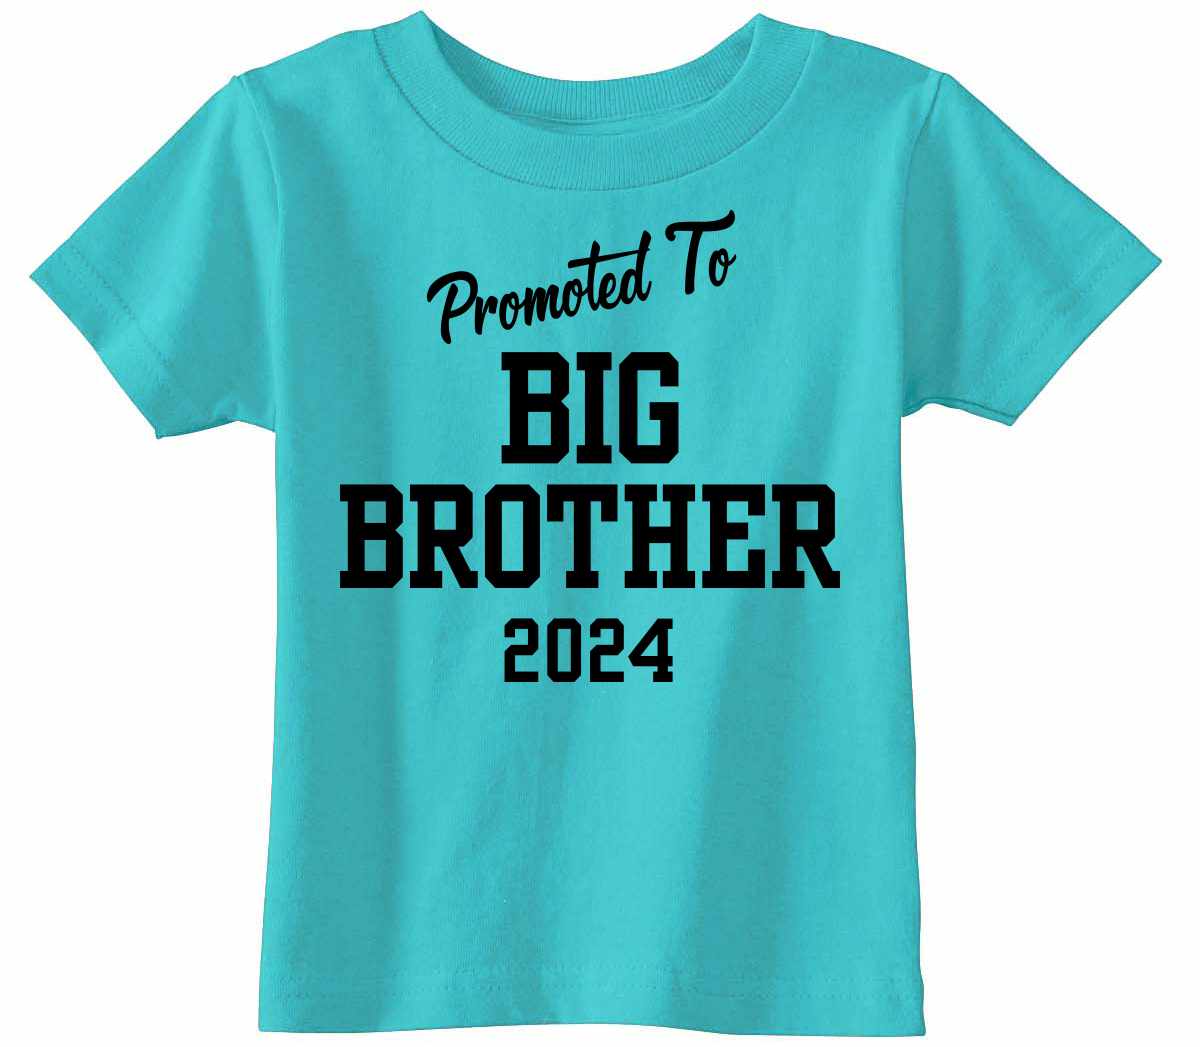 Promoted to Big Brother 2024 on Infant-Toddler T-Shirt